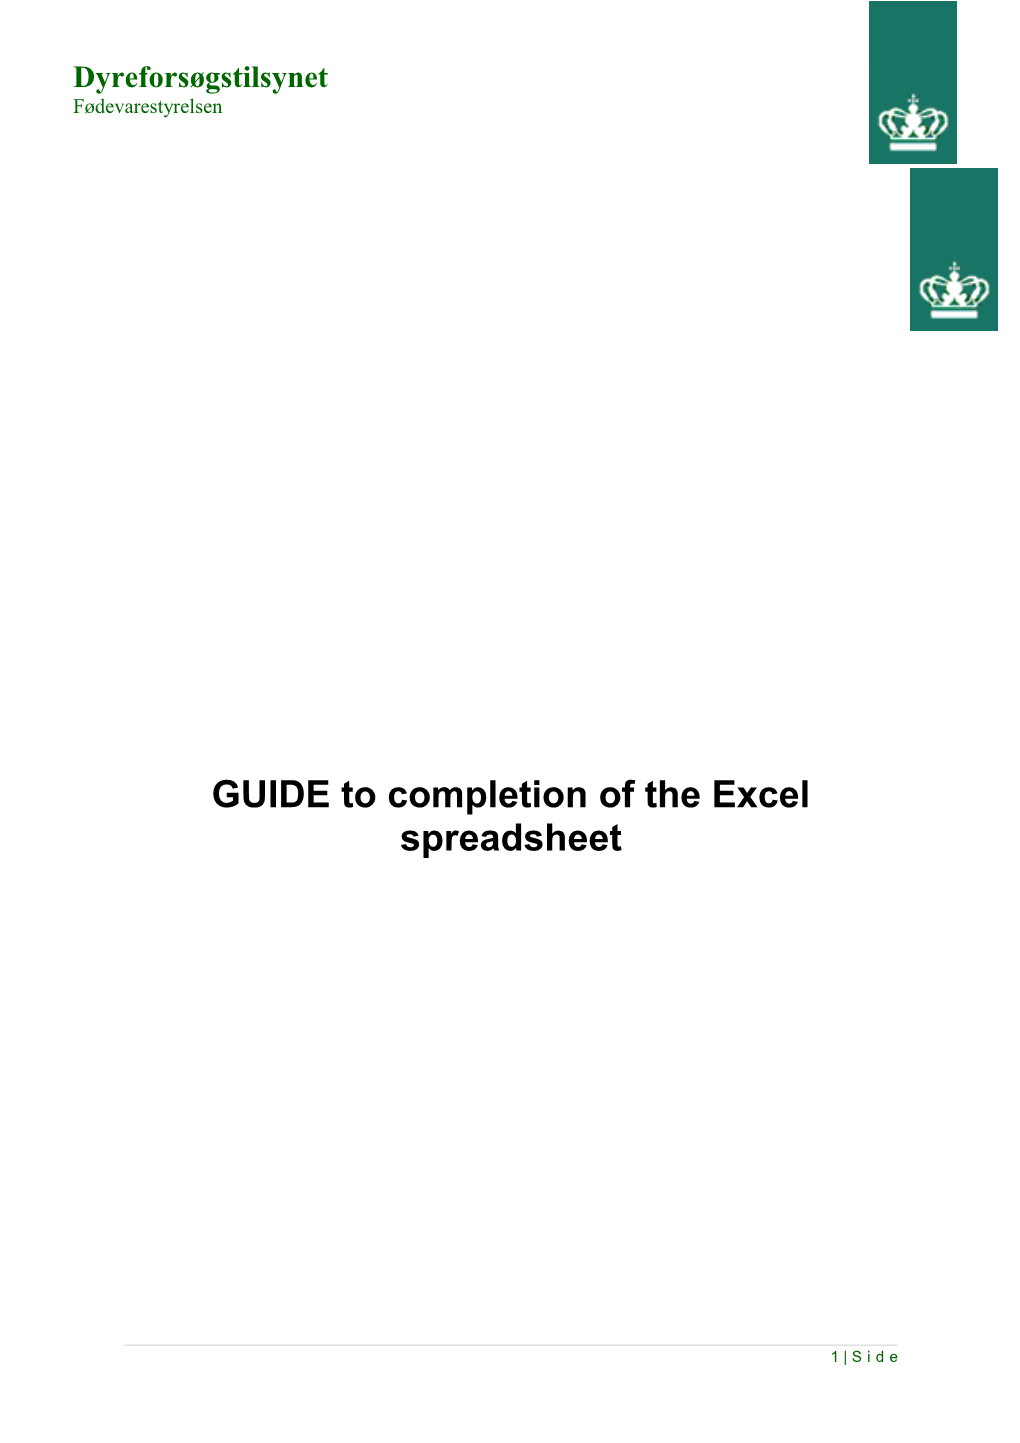 GUIDE to Completion of the Excel Spreadsheet